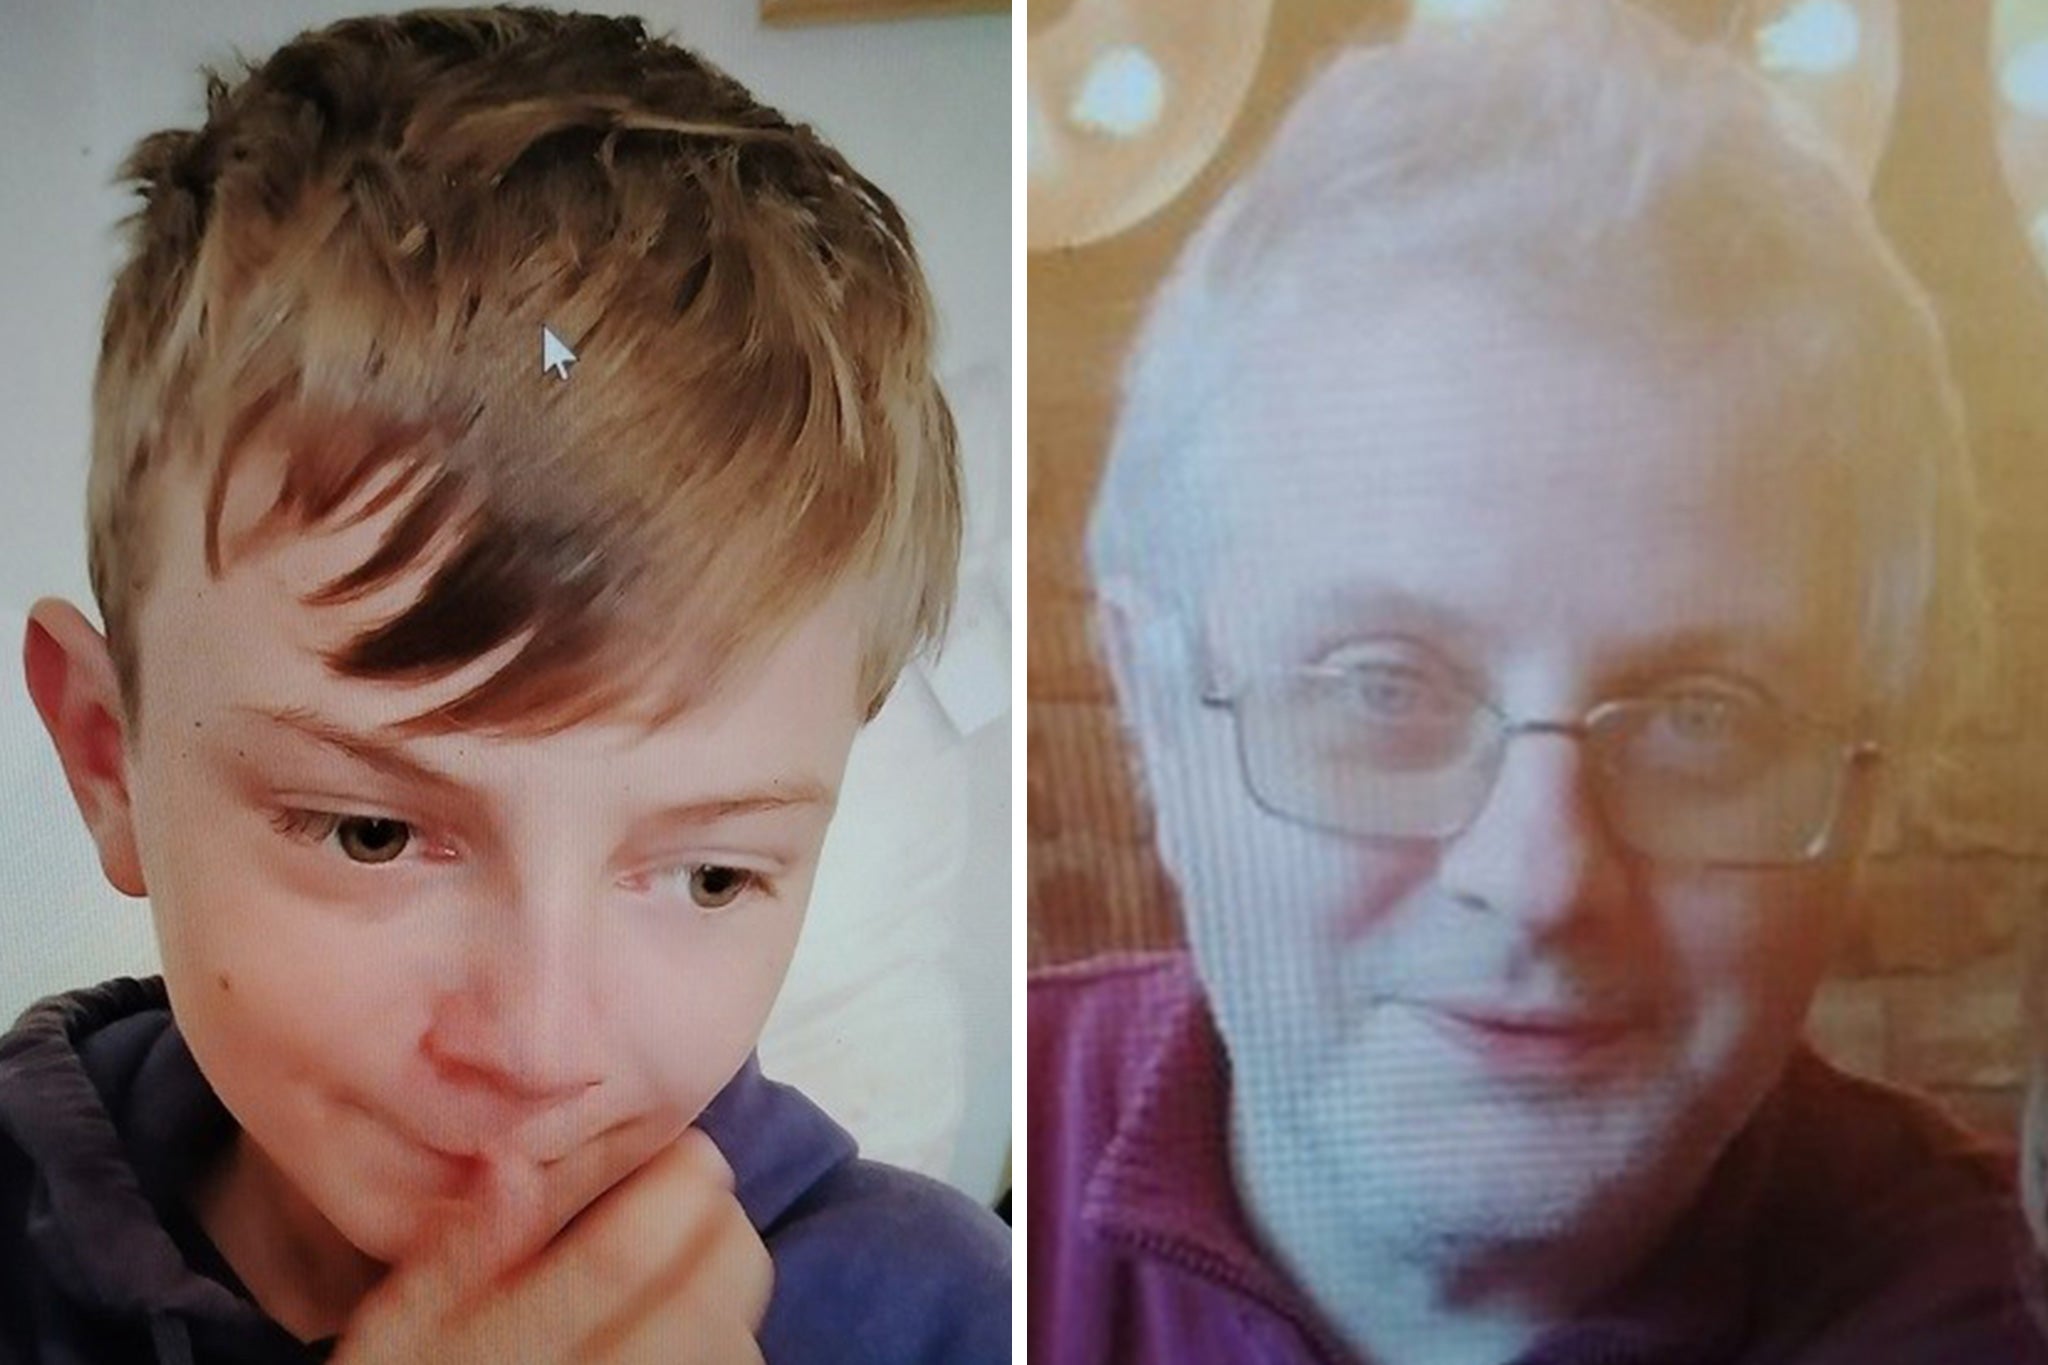 Tom Parry and his son Richie went missing while walking in the Scottish Highlands